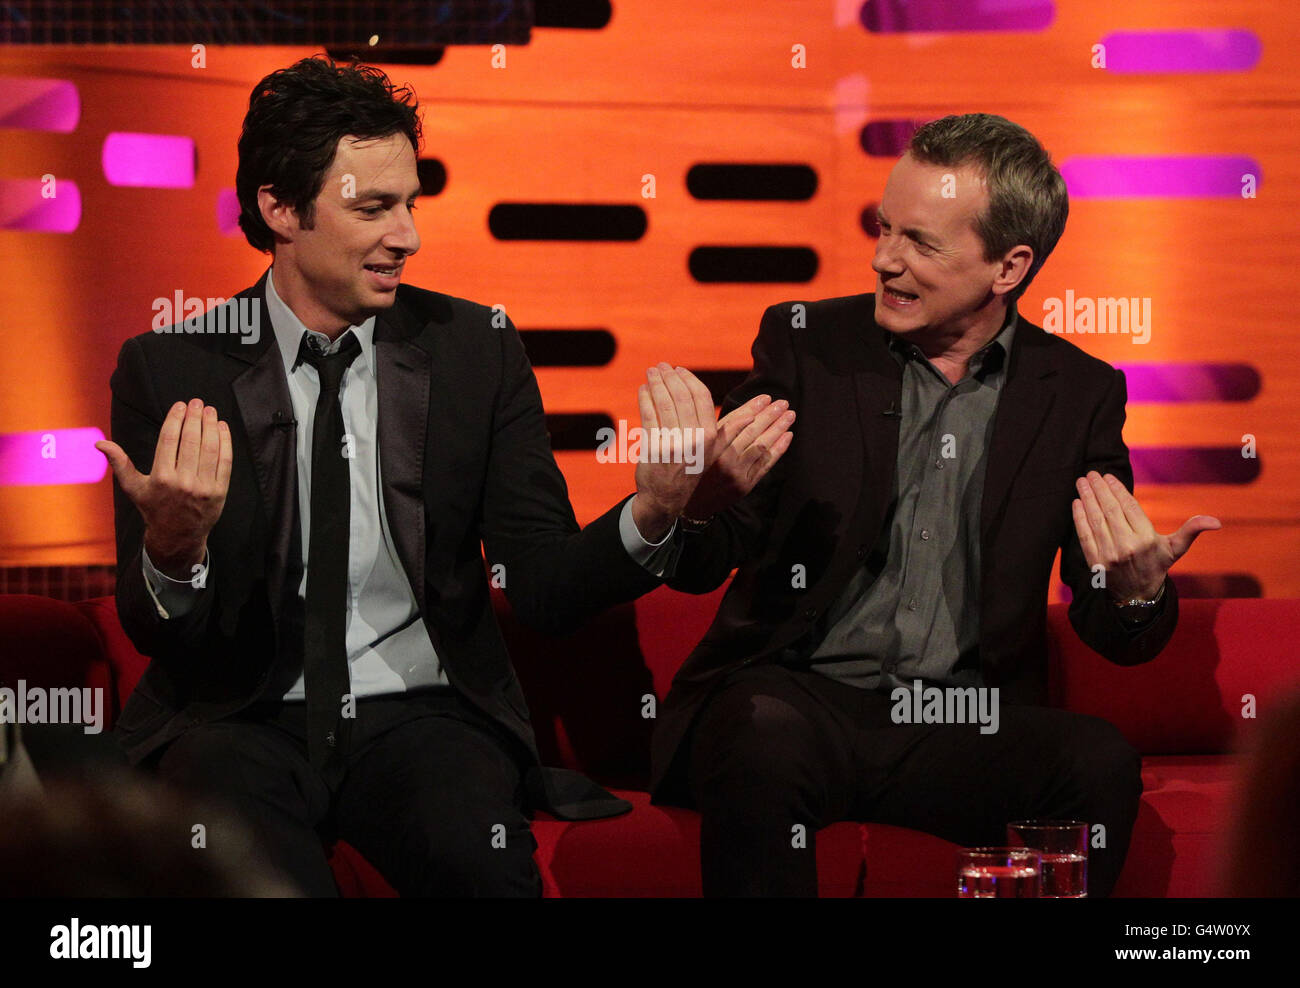 Guests Zach Braff (left) and Frank Skinner during filming of The Graham Norton Show at The London Studios in south London. Stock Photo